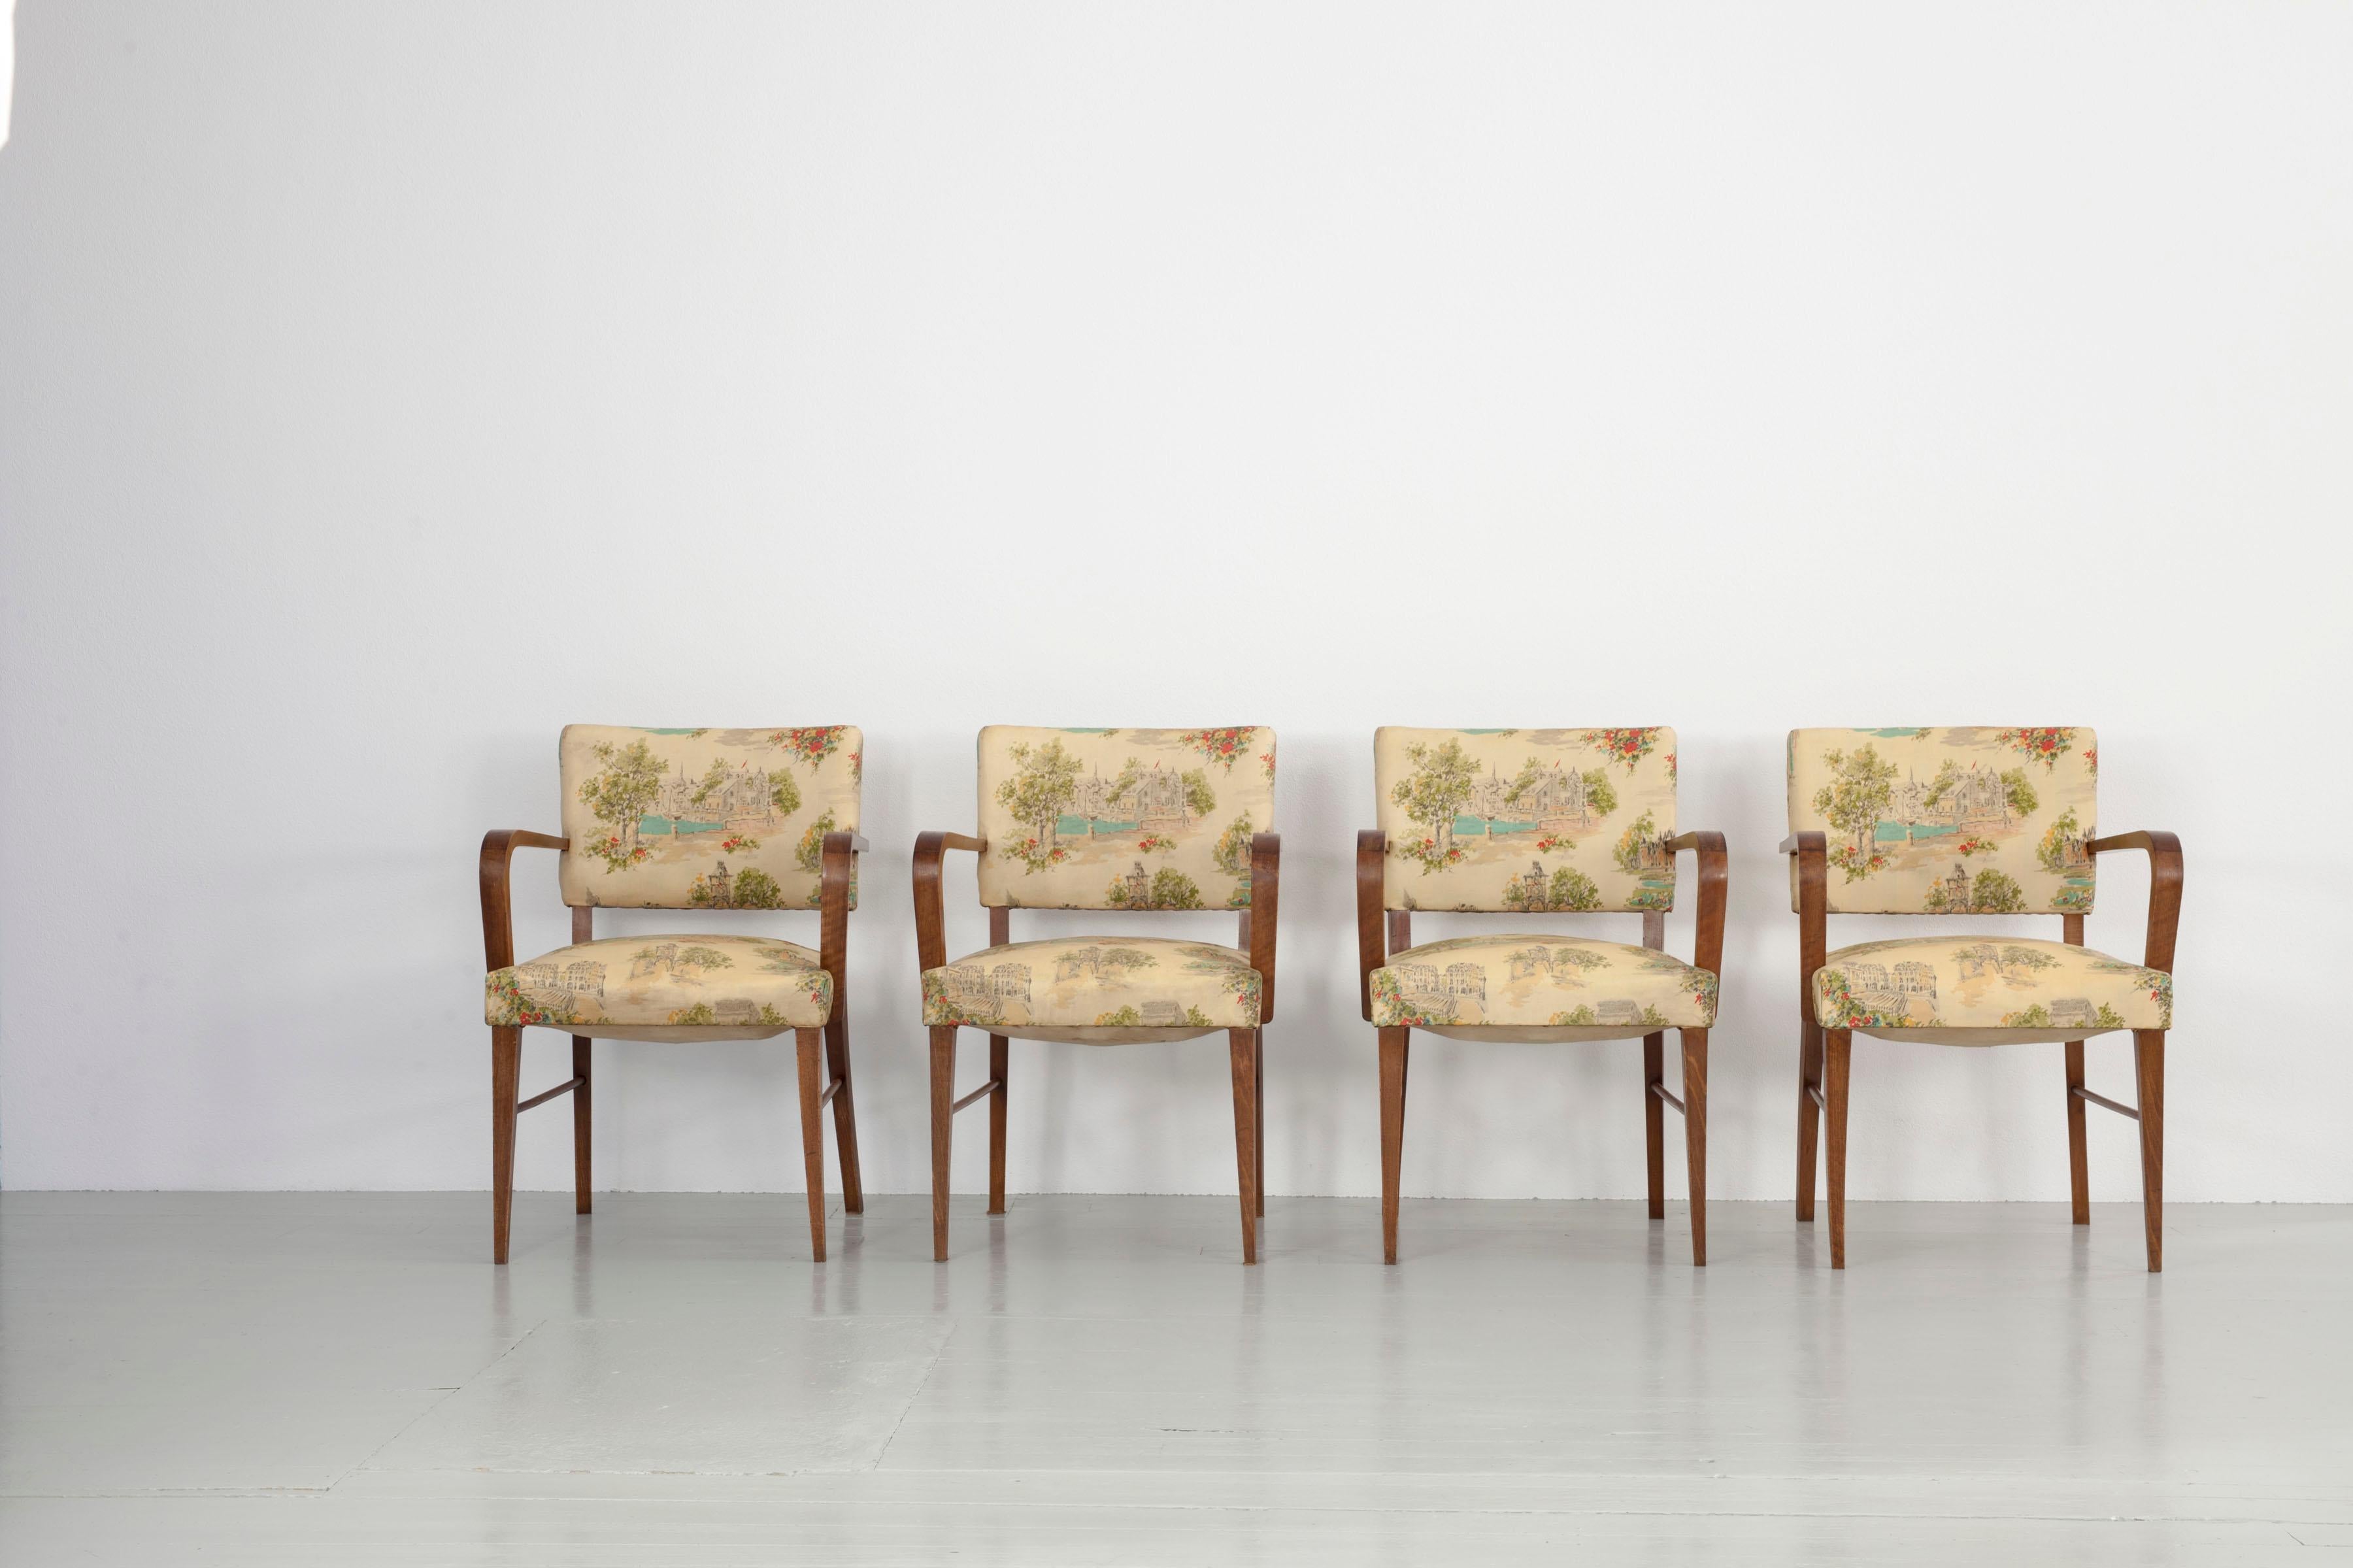 Painted Set of 4 Italian Authentic Armchairs, Chintz Cover and Landscape Scenery, 1930s For Sale